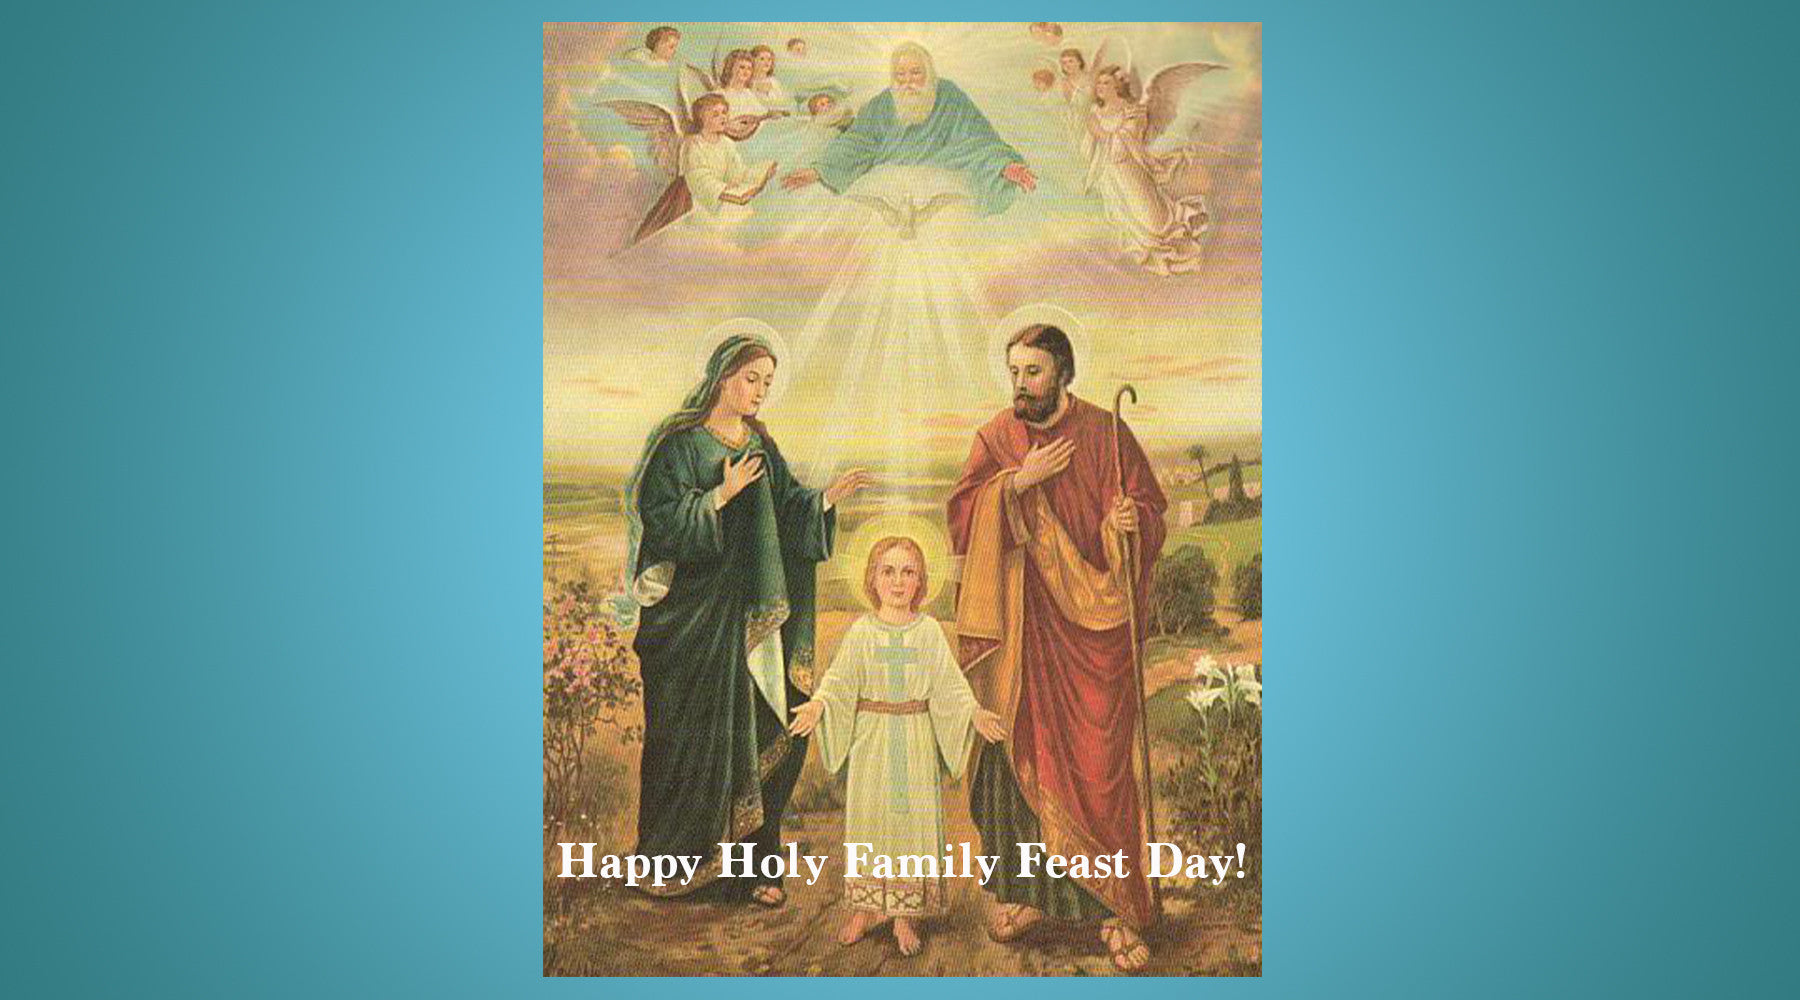 THE HOLY FAMILY - FEAST DAY